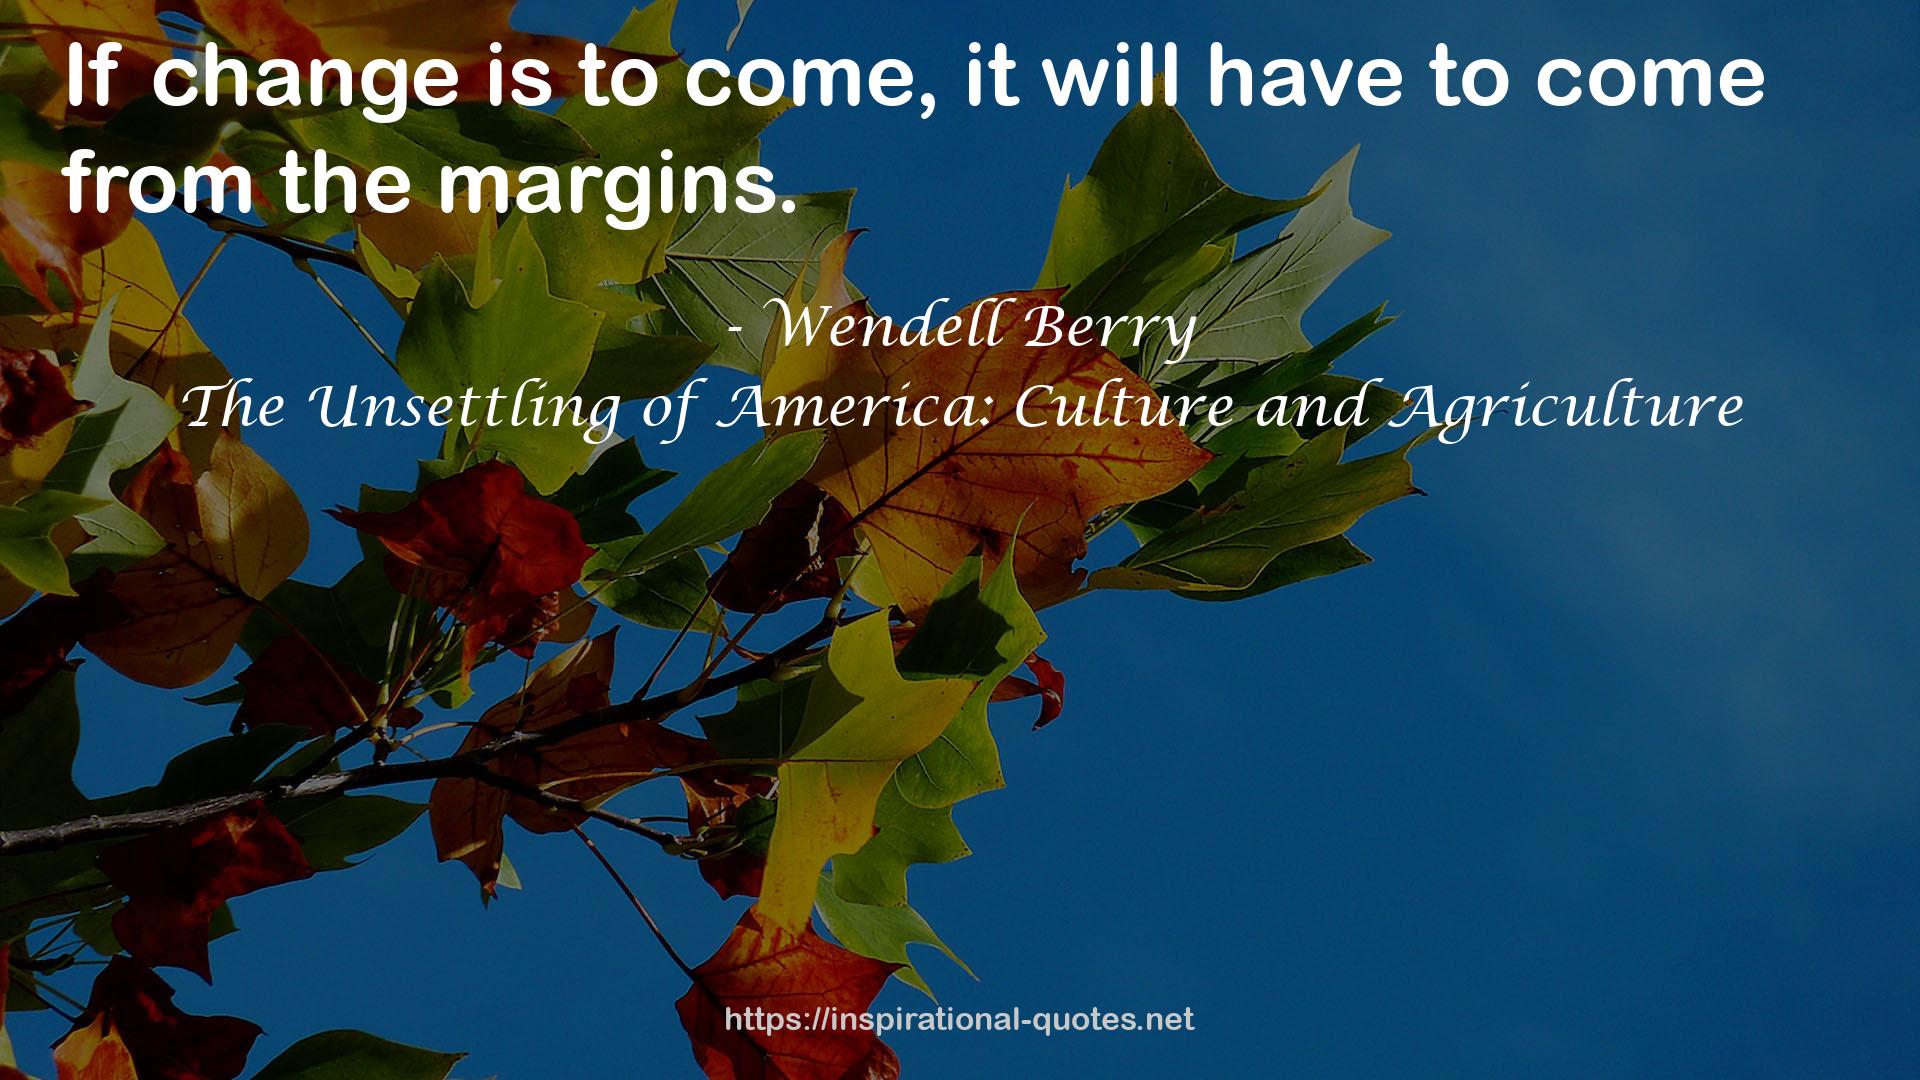 The Unsettling of America: Culture and Agriculture QUOTES